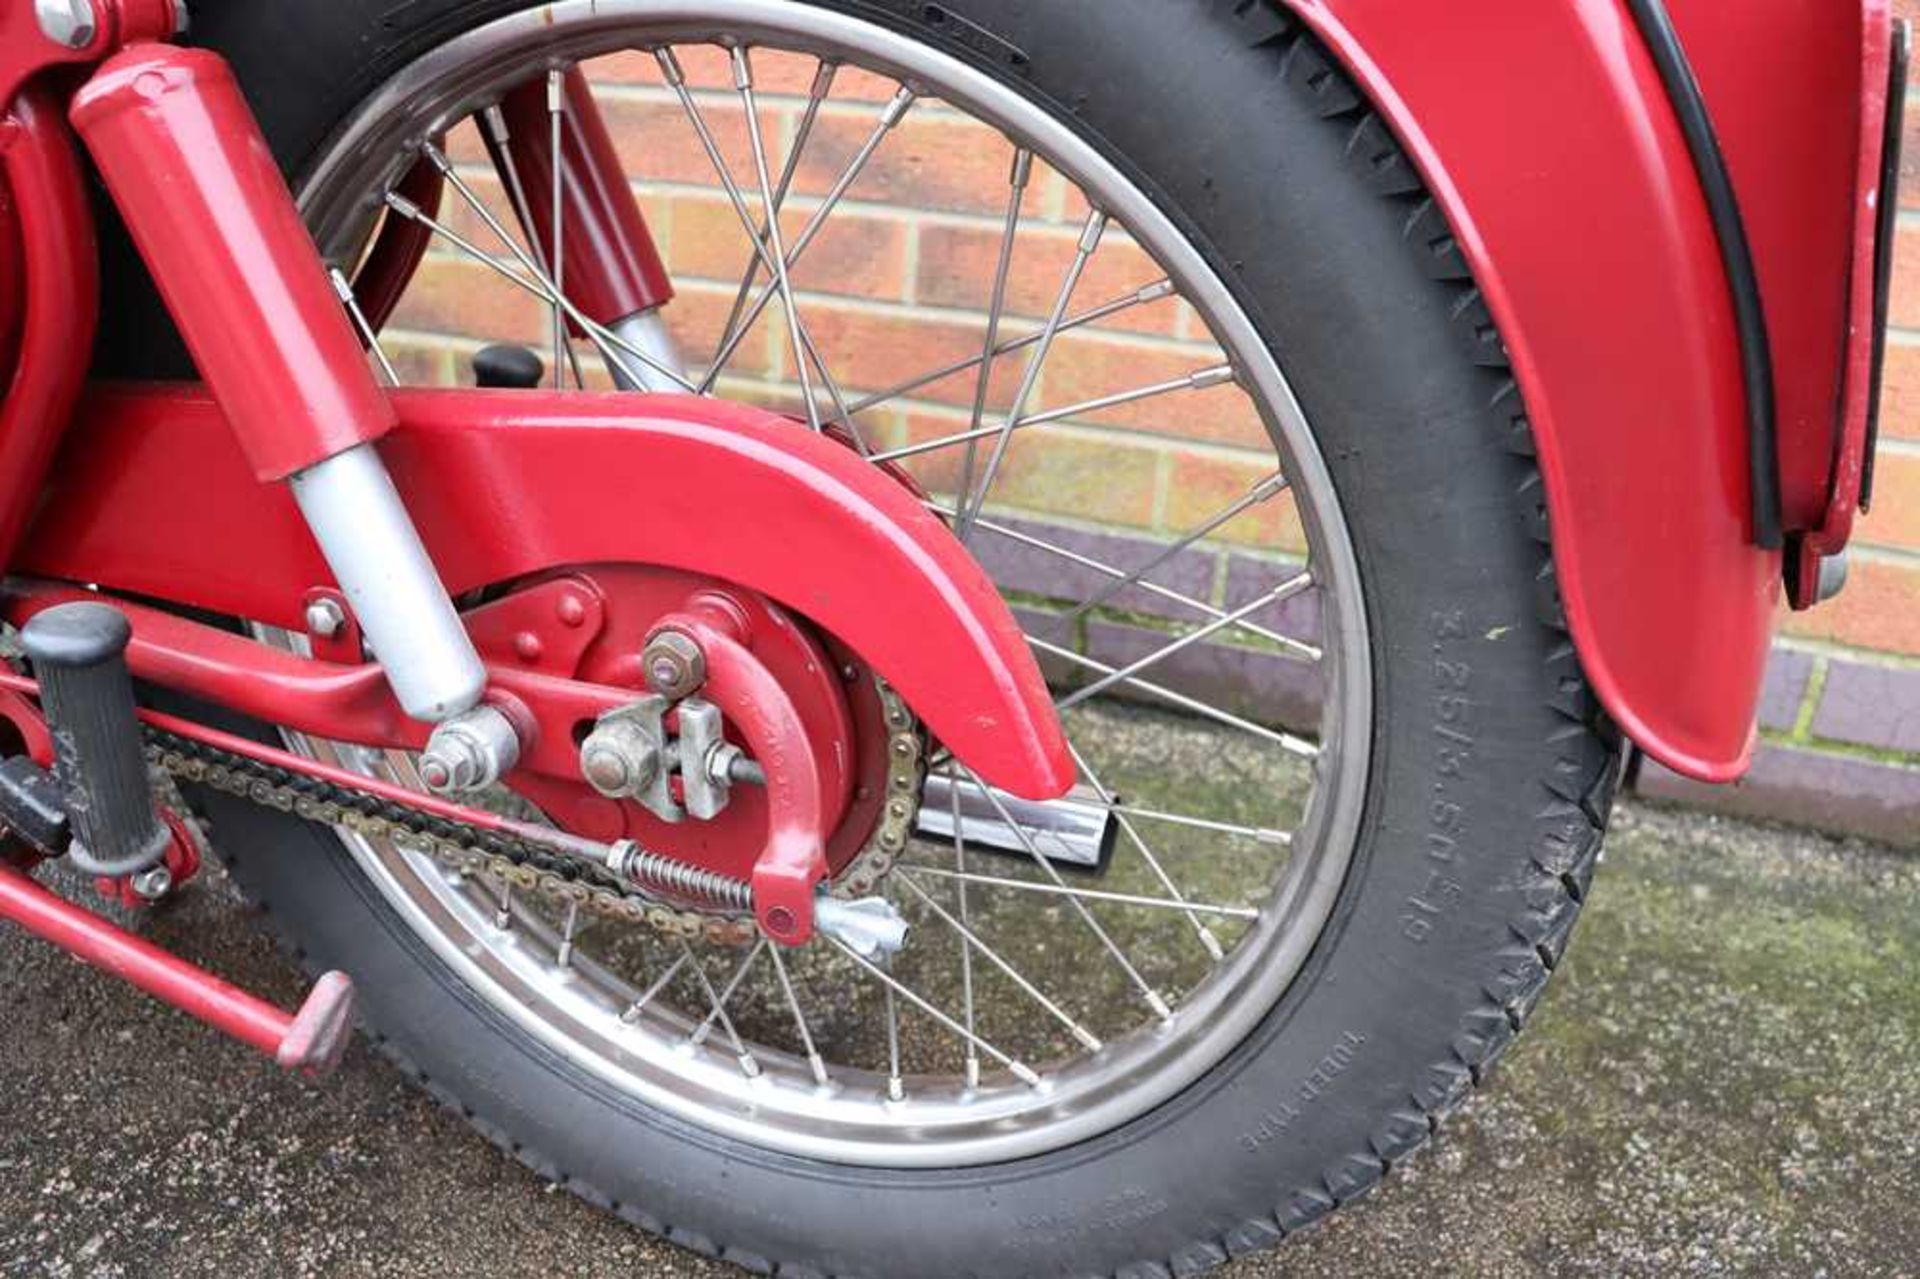 1956 BSA C12 Stainless steel rims and spokes - Image 28 of 44